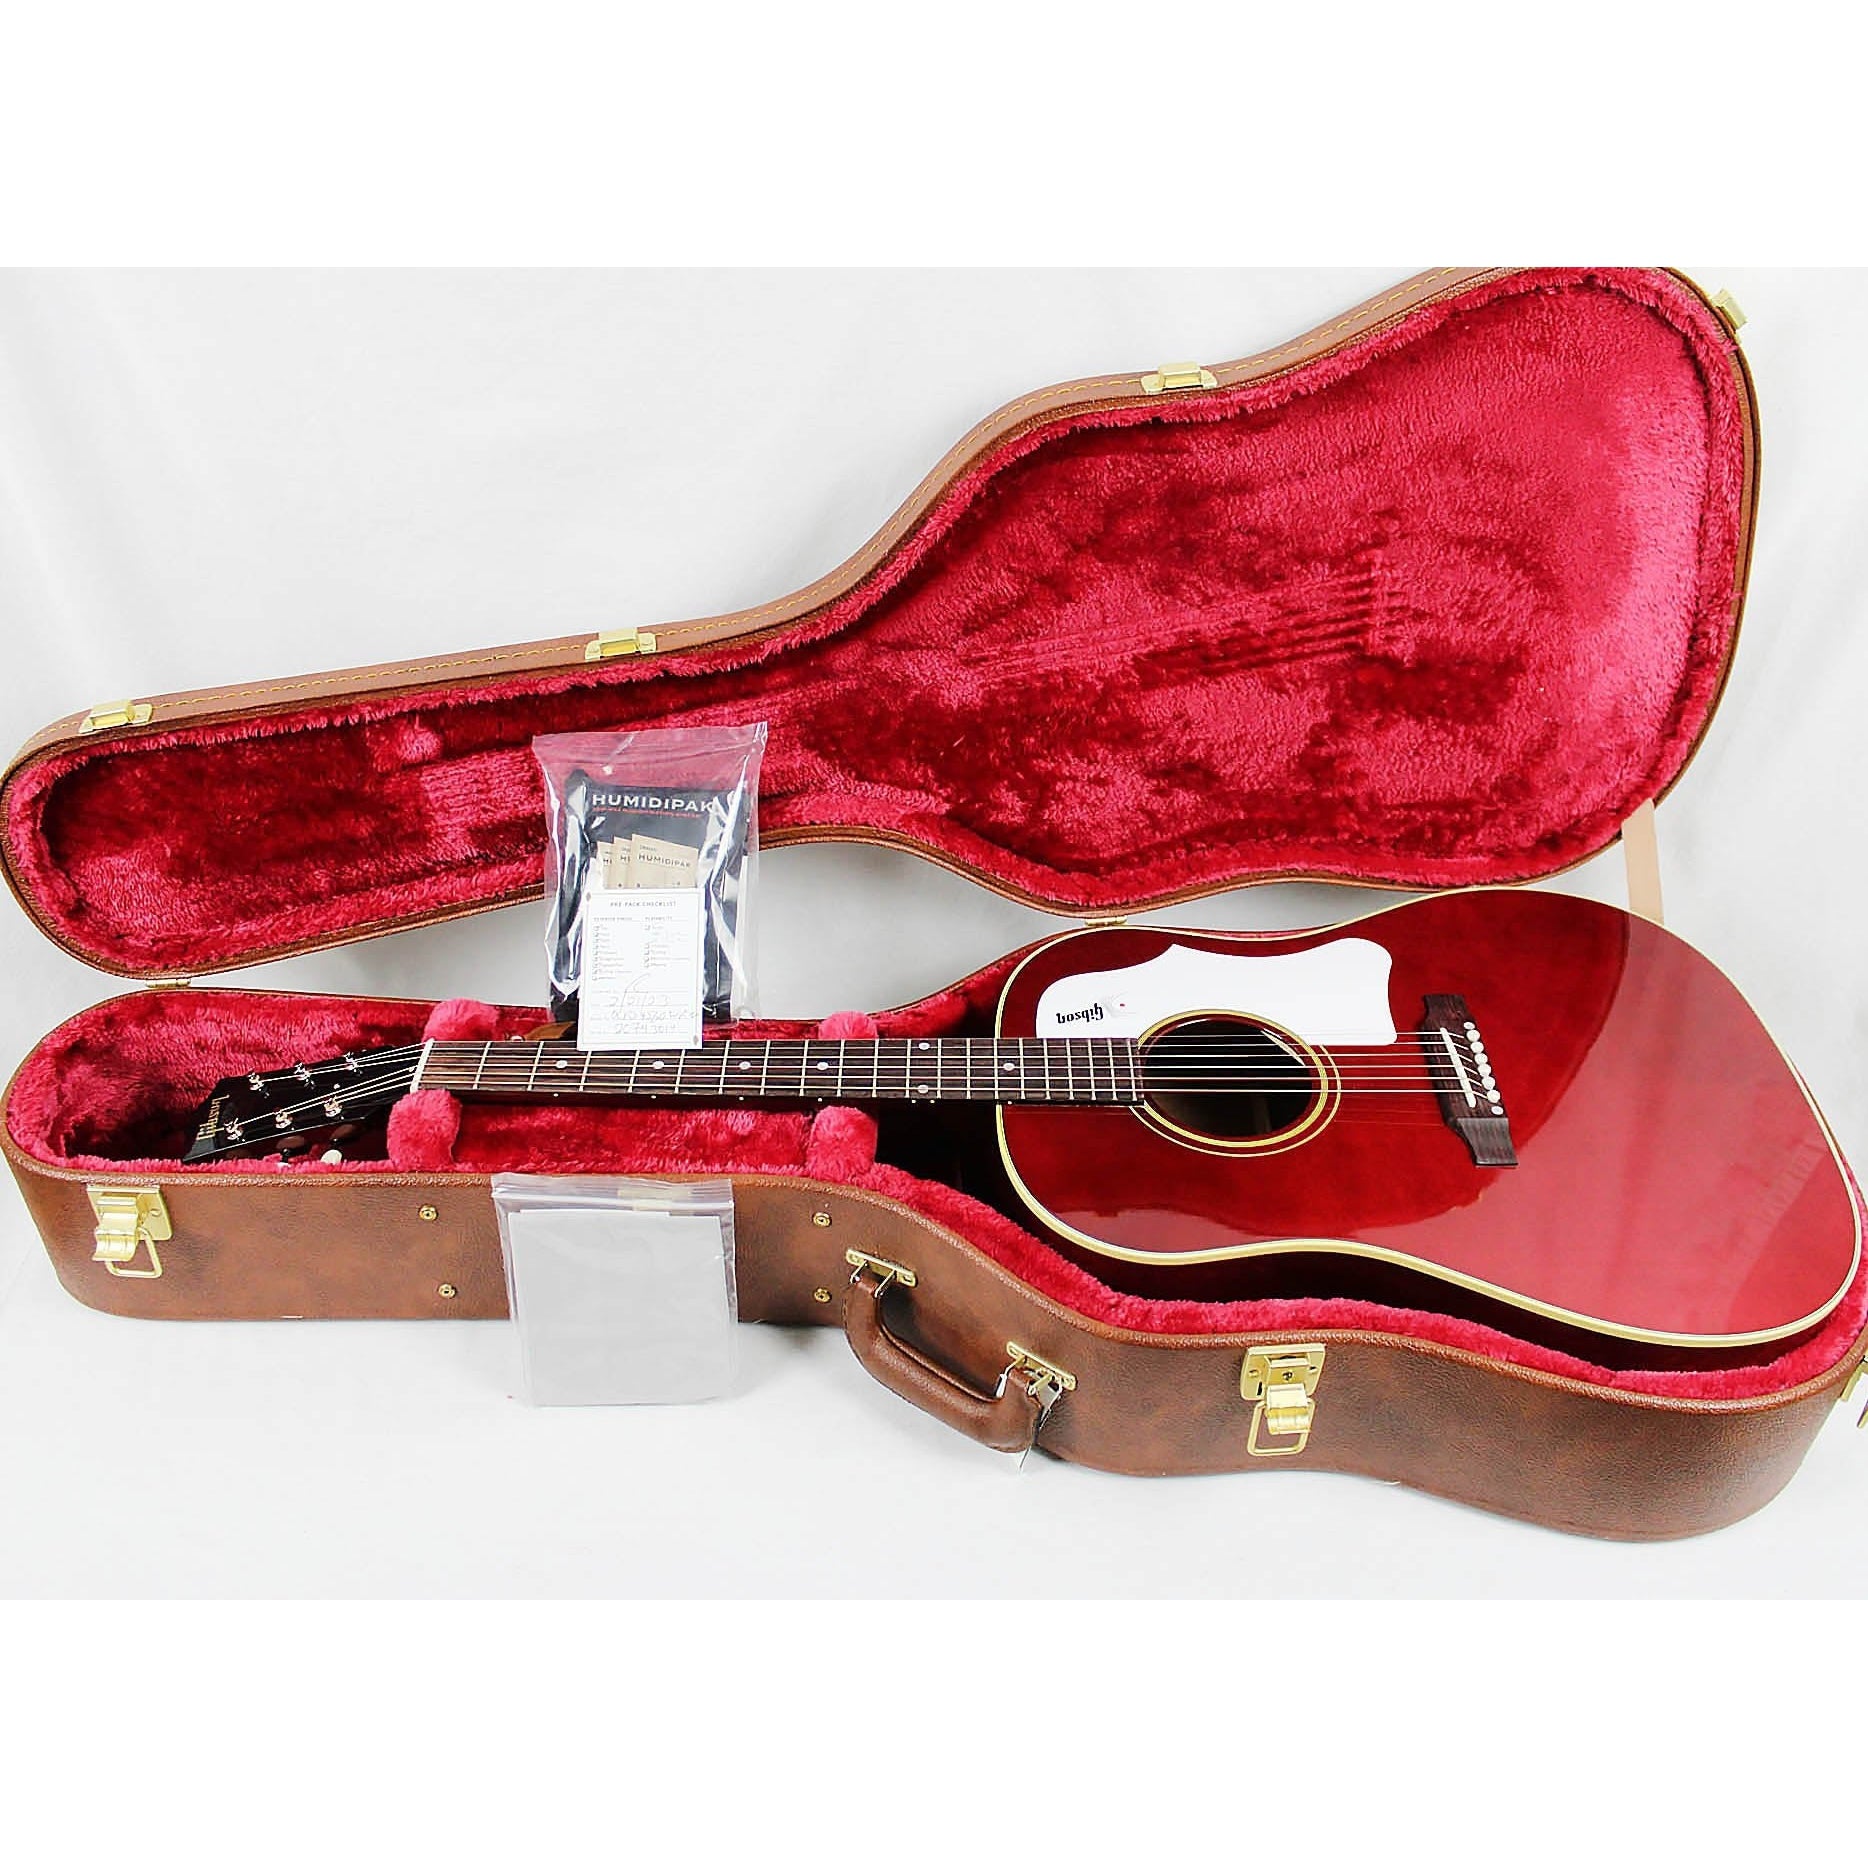 Gibson Acoustic 60's J-45 Original - Wine Red | Leitz Music Exclusive - Leitz Music-711106036991-OCRS4560WRN